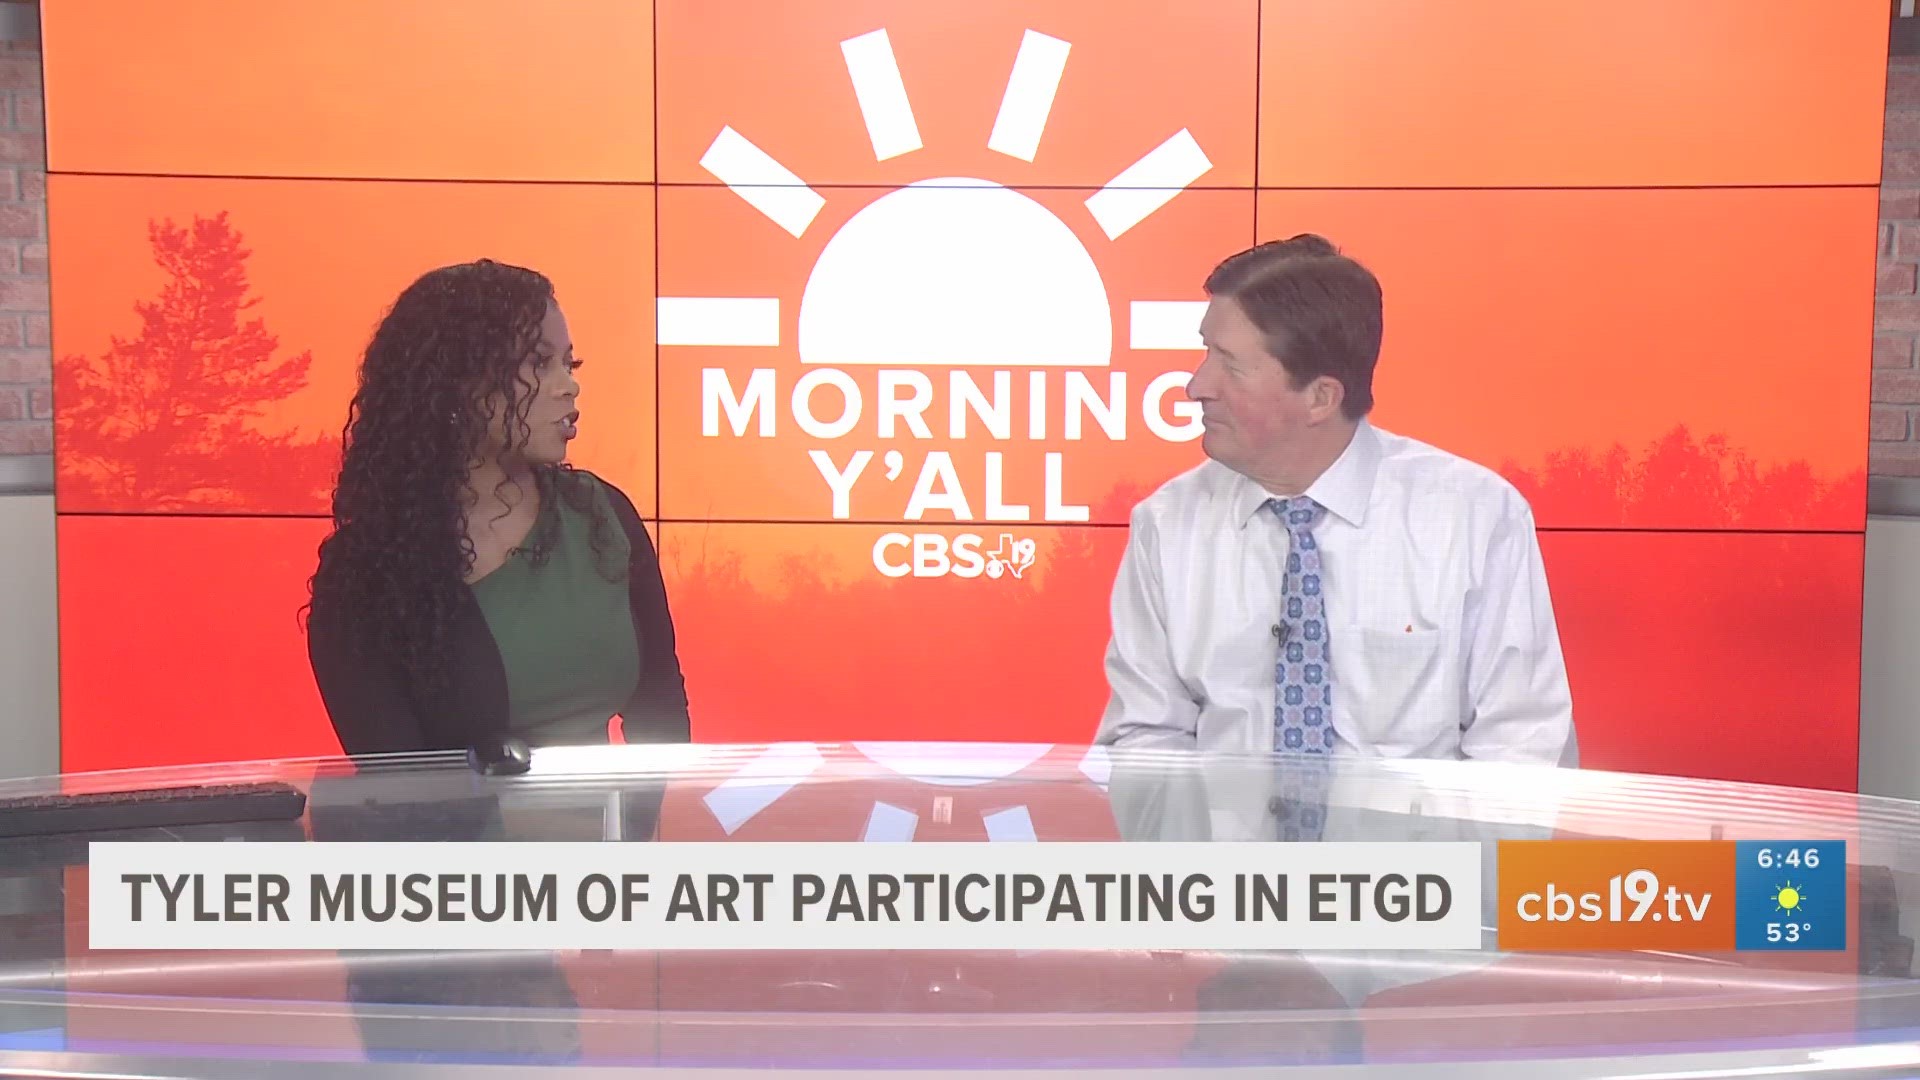 The Tyler Museum of Art seeks to raise $30,000.